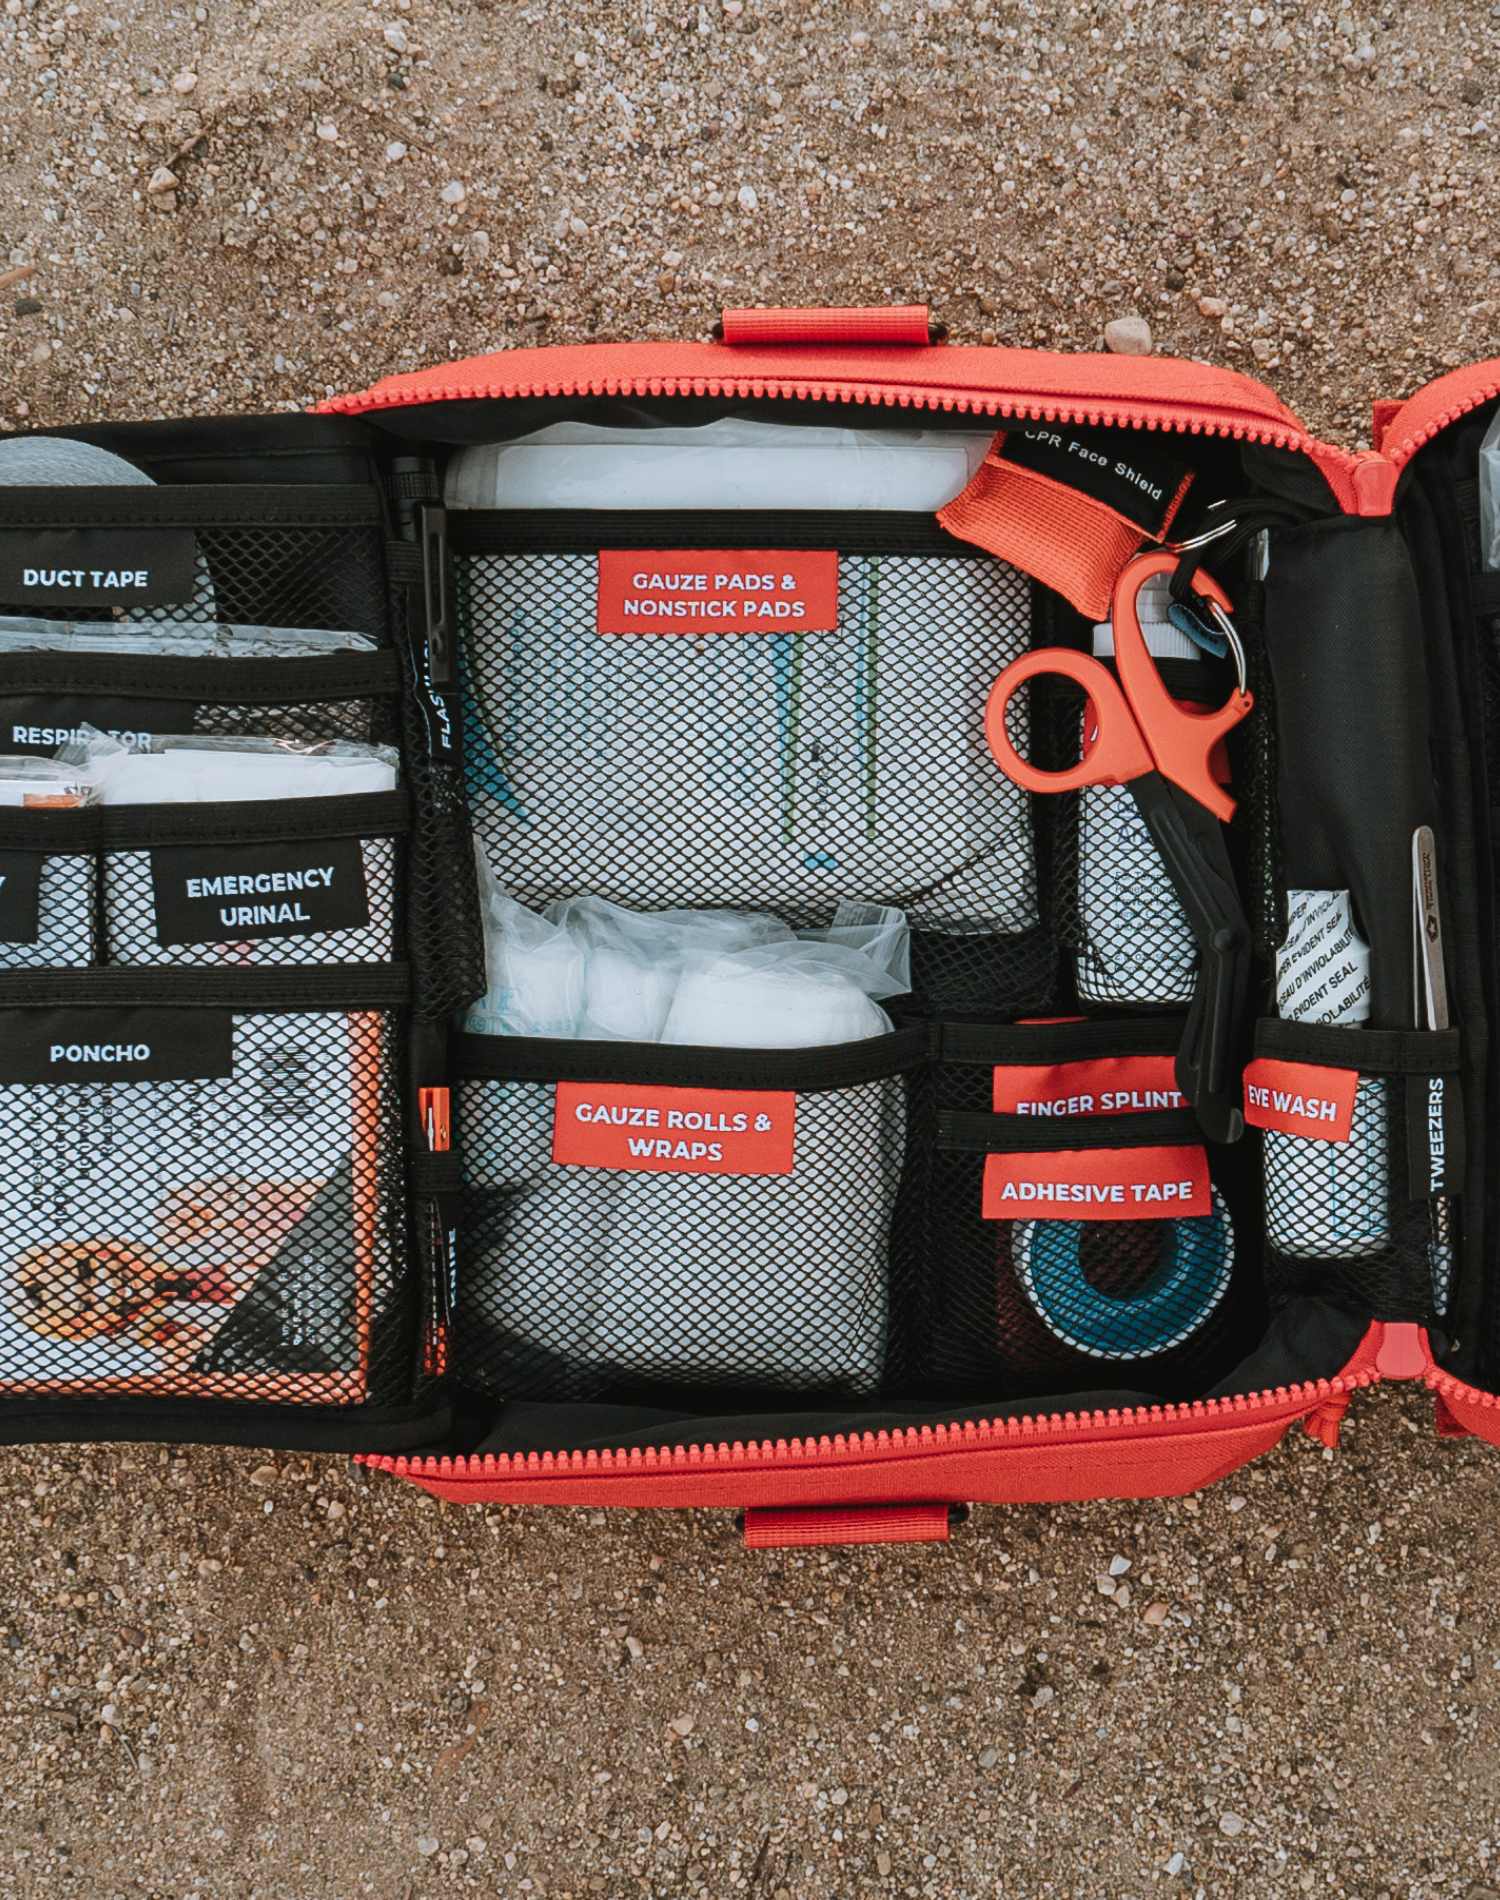 An up close photo of the Roadie open and its labeled pouches for each first aid item